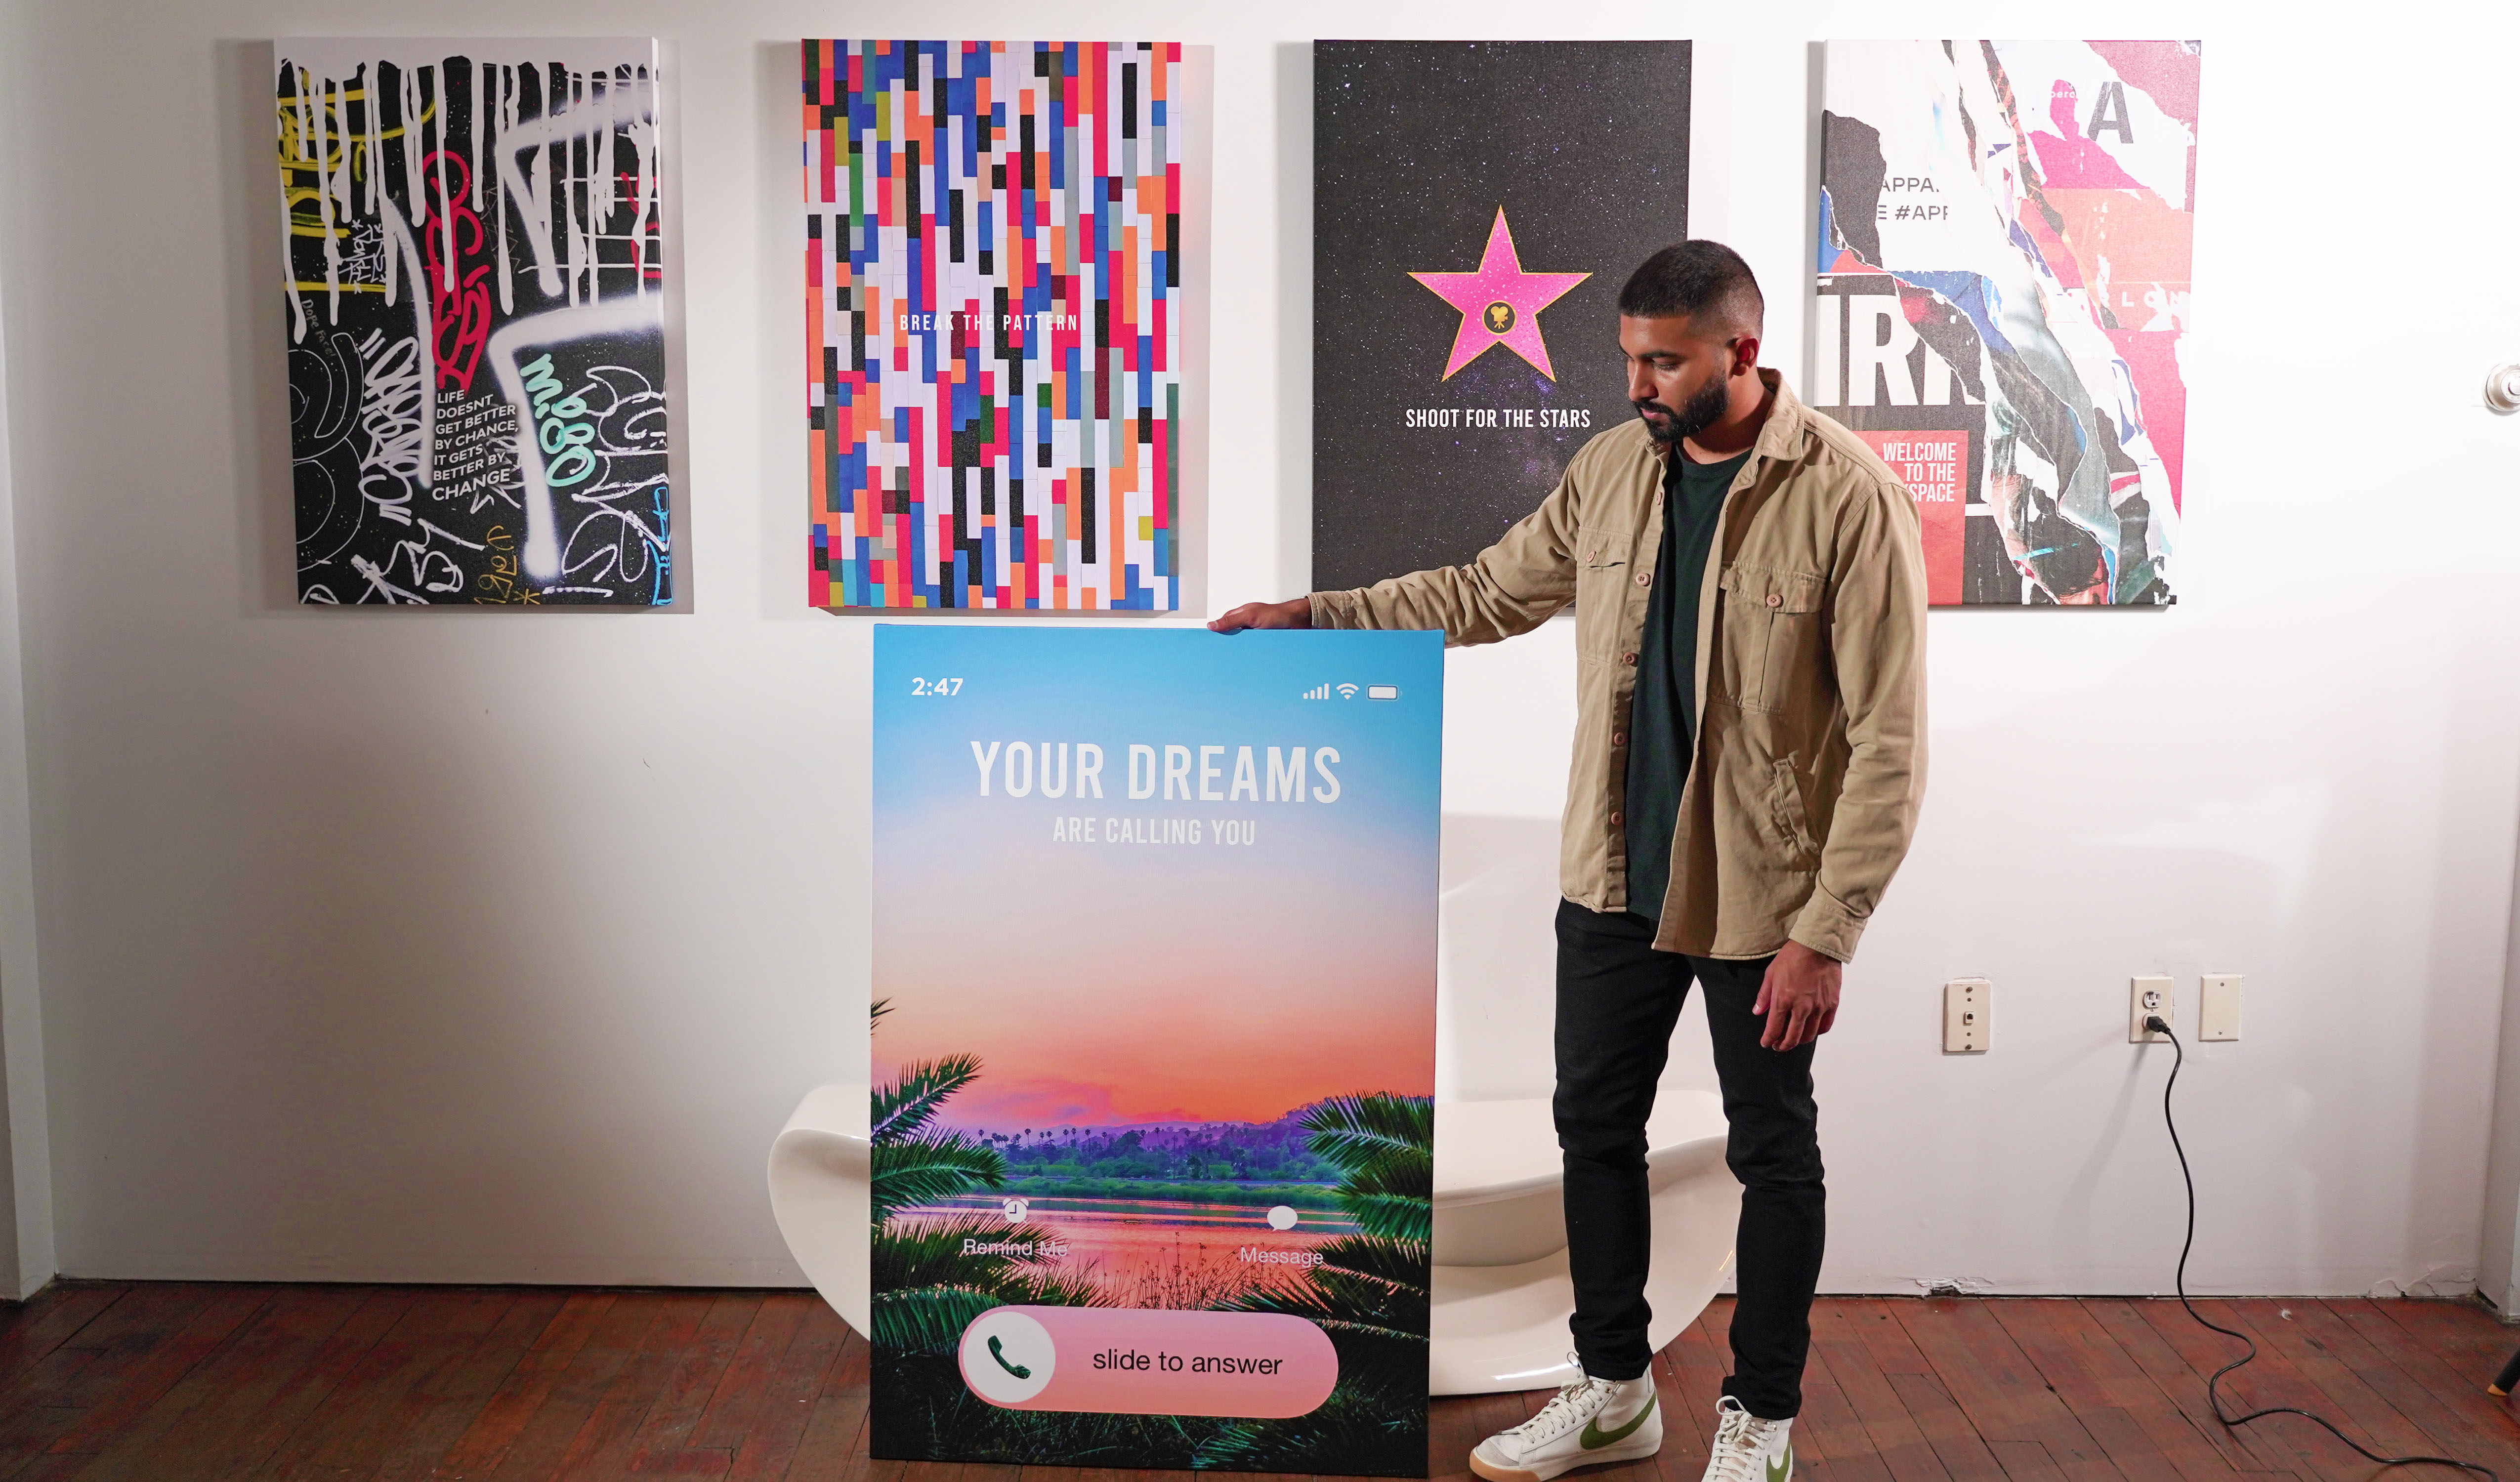 INSPXRE Supplies Inspirational Art Pieces To Motivate Young Entrepreneurs While Giving Back